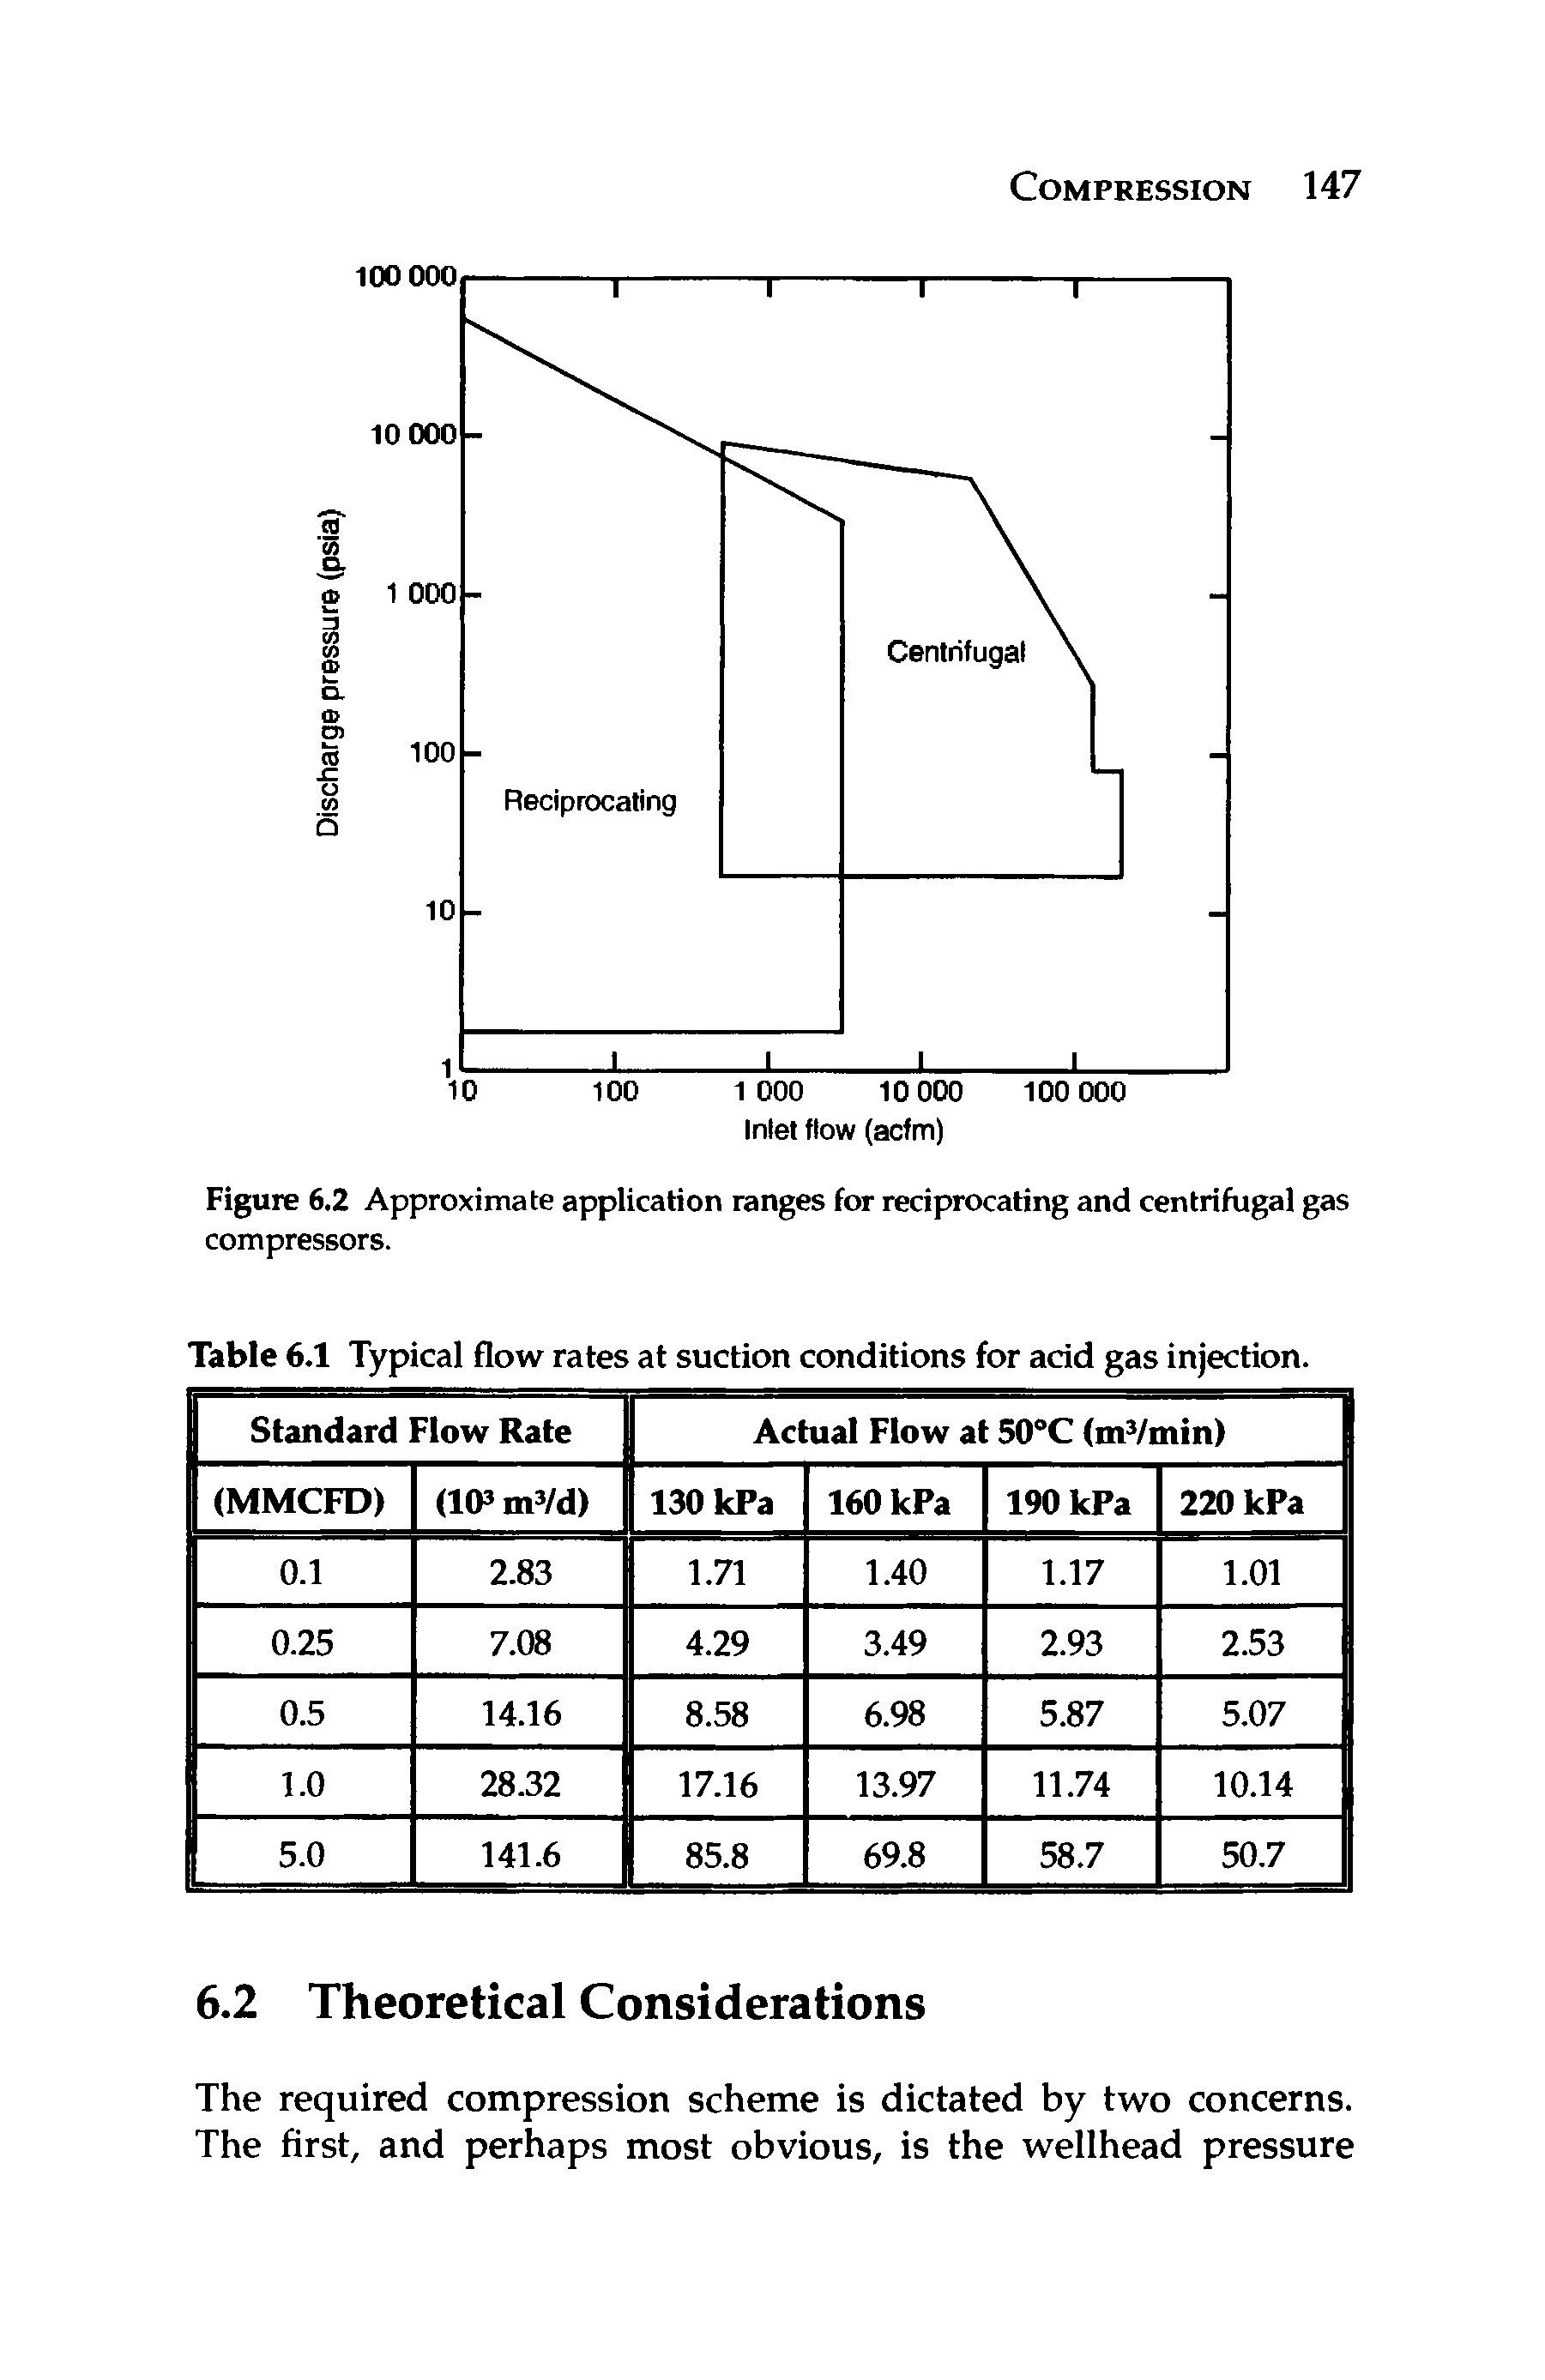 Figure 6.2 Approximate application ranges for reciprocating and centrifugal gas compressors.